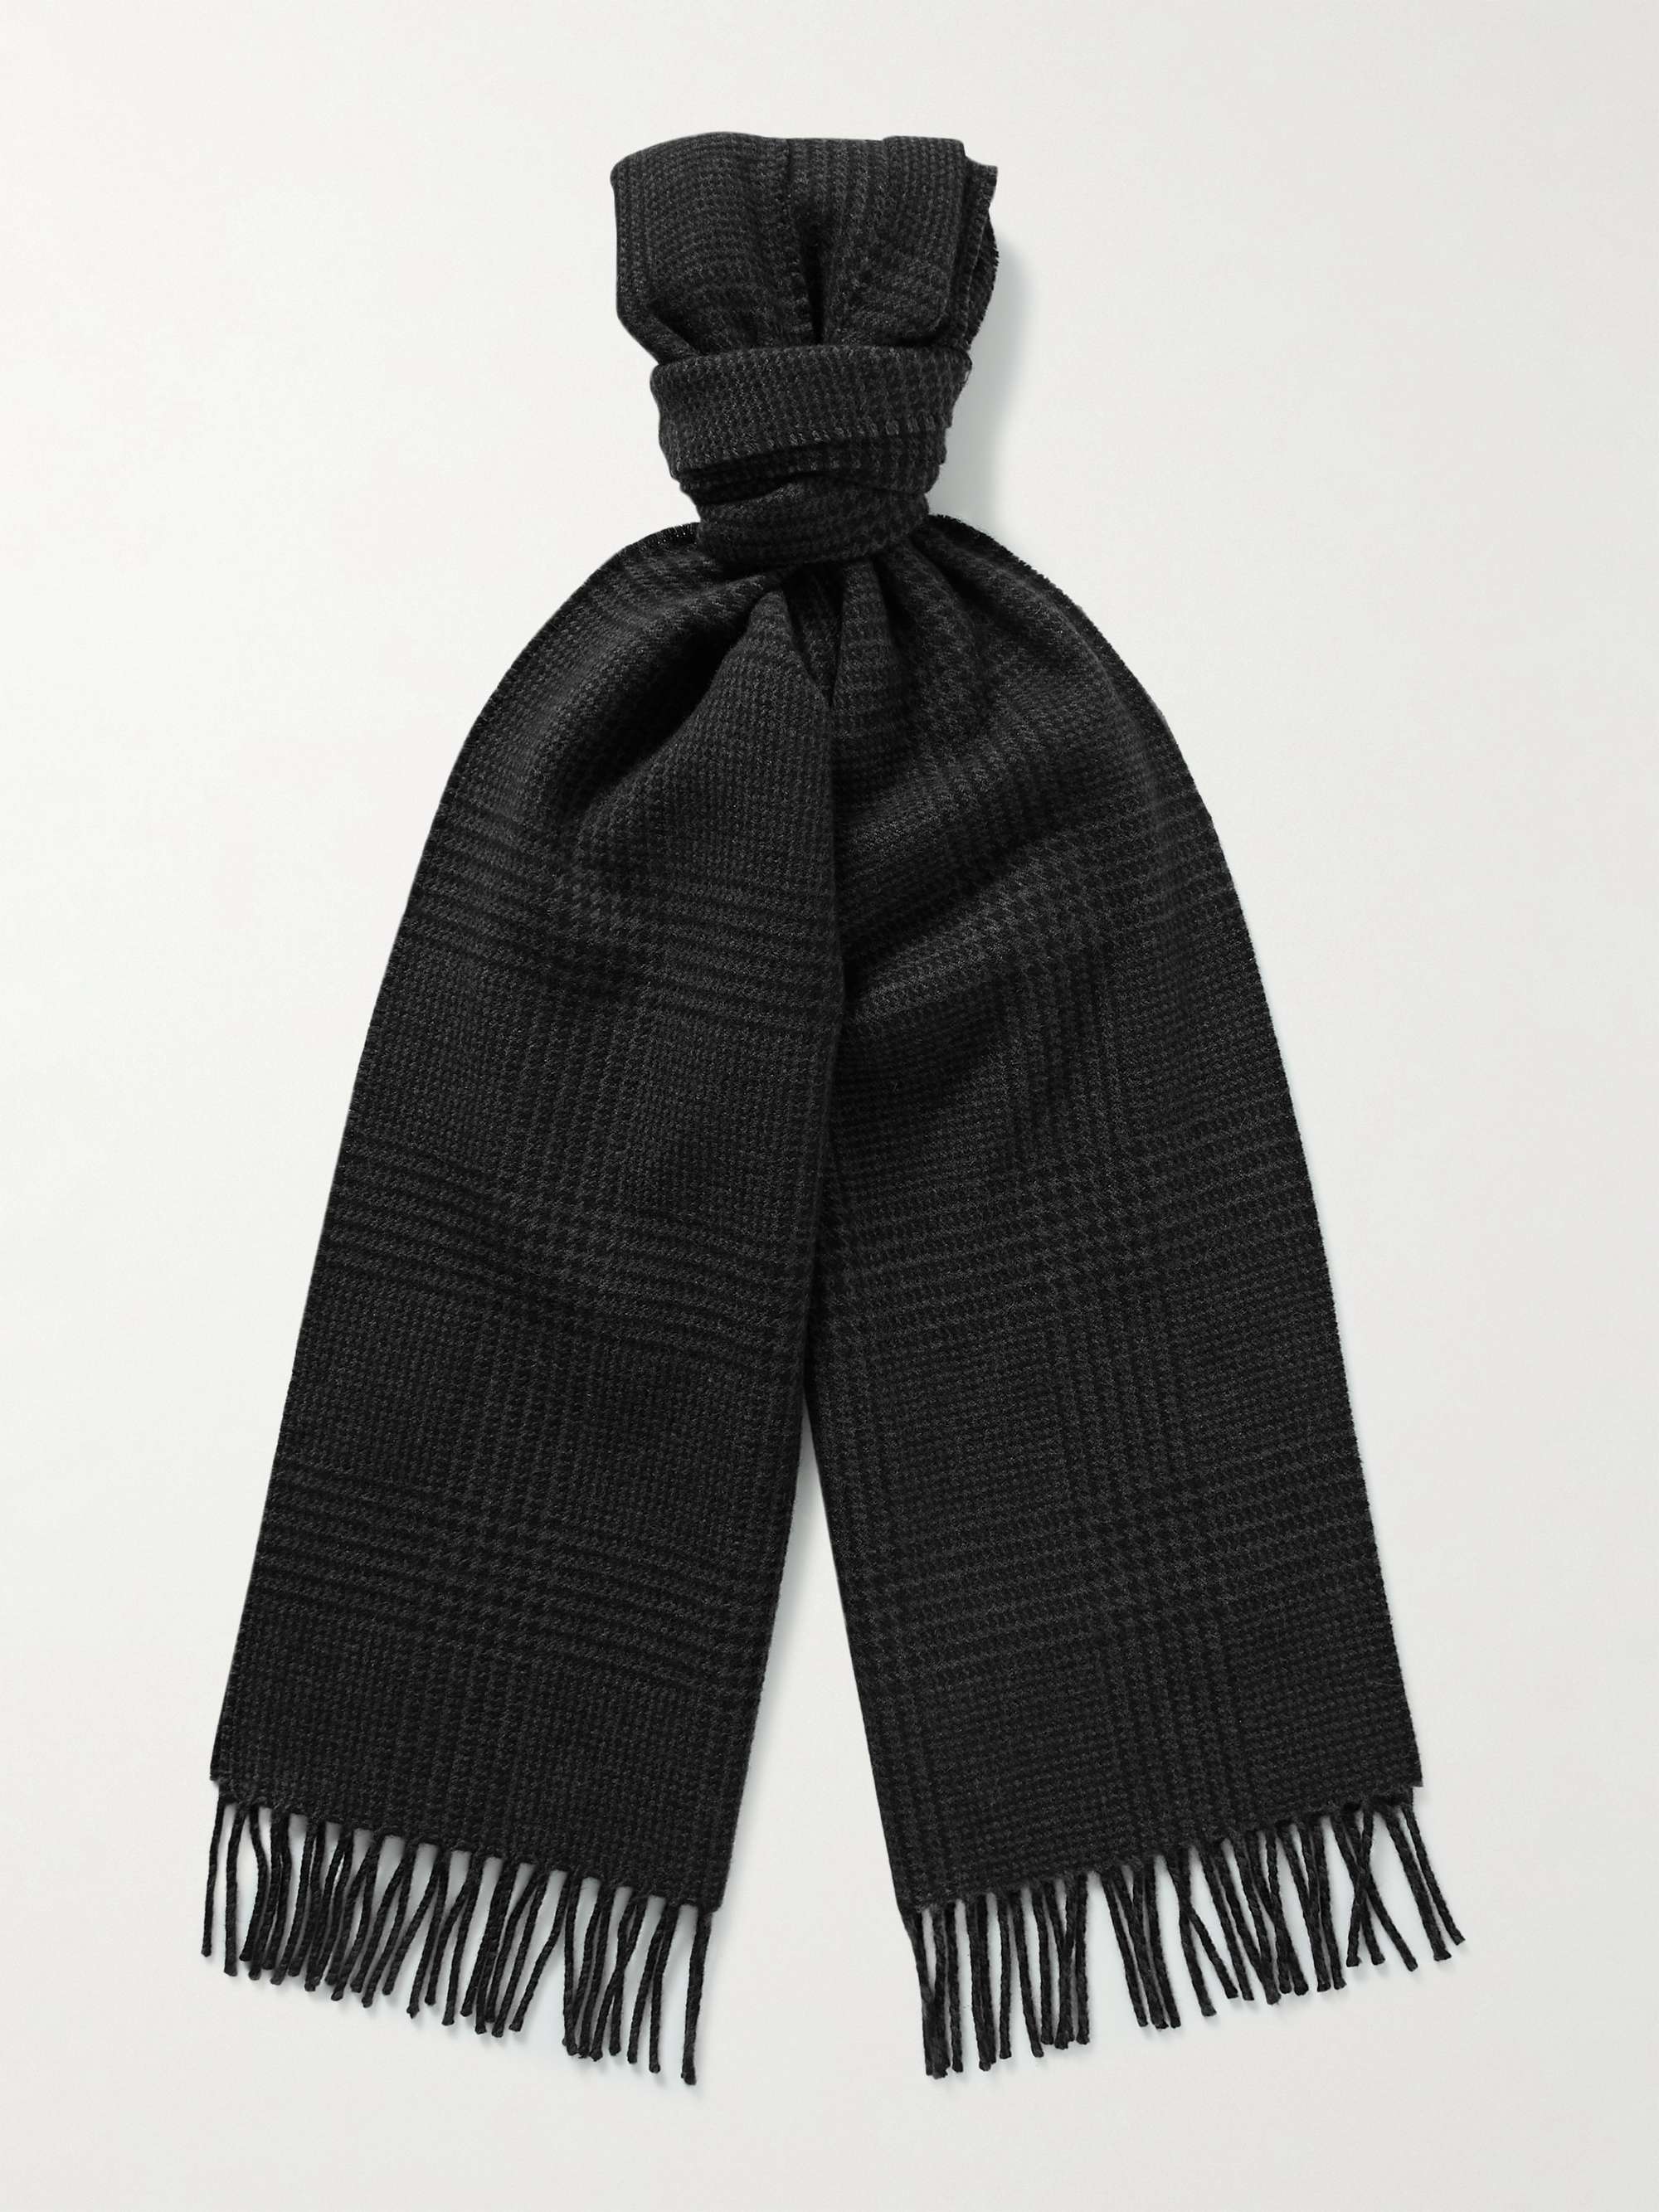 TOM FORD Logo-Appliquéd Fringed Prince of Wales Checked Cashmere and Wool-Blend Scarf